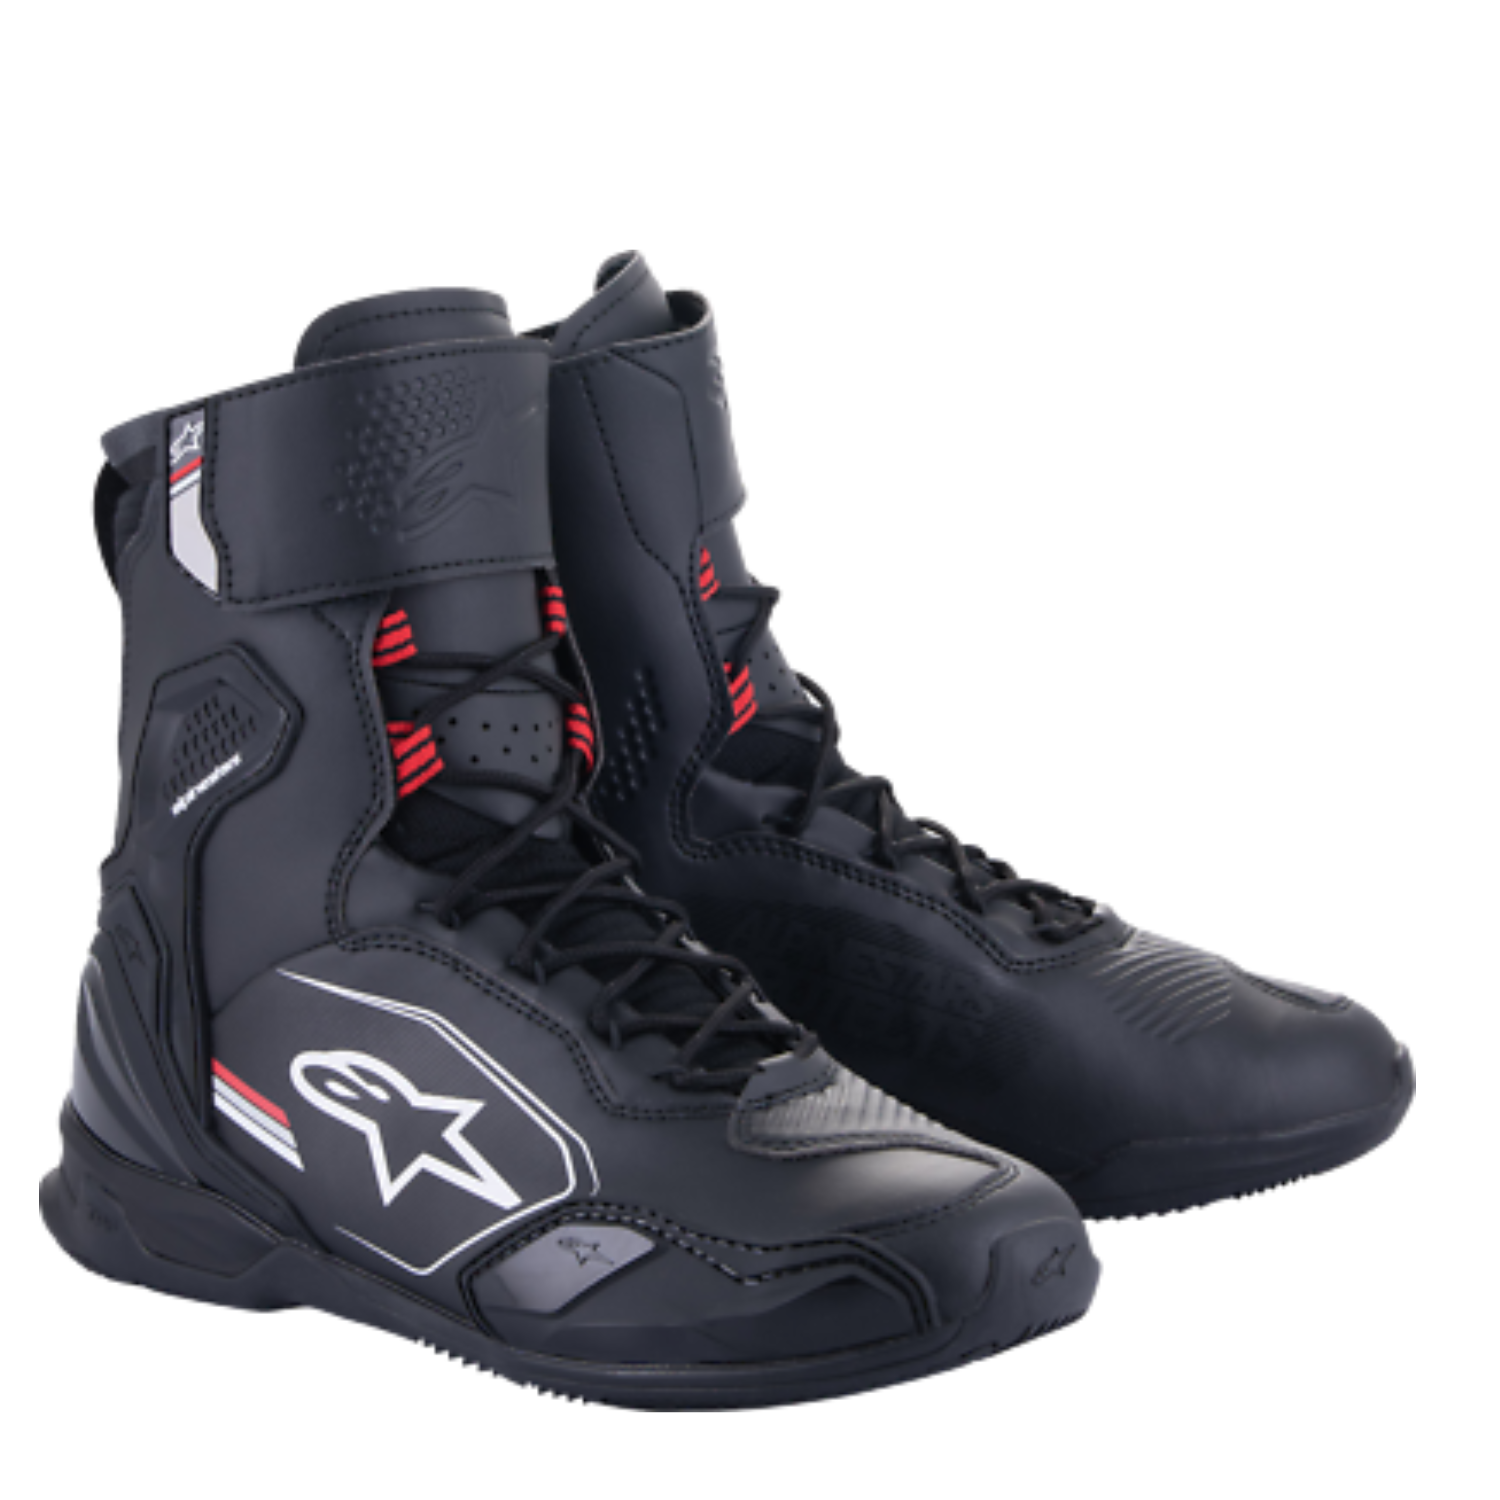 Image of EU Alpinestars Superfaster Shoes Black Gray Bright Red Taille US 9